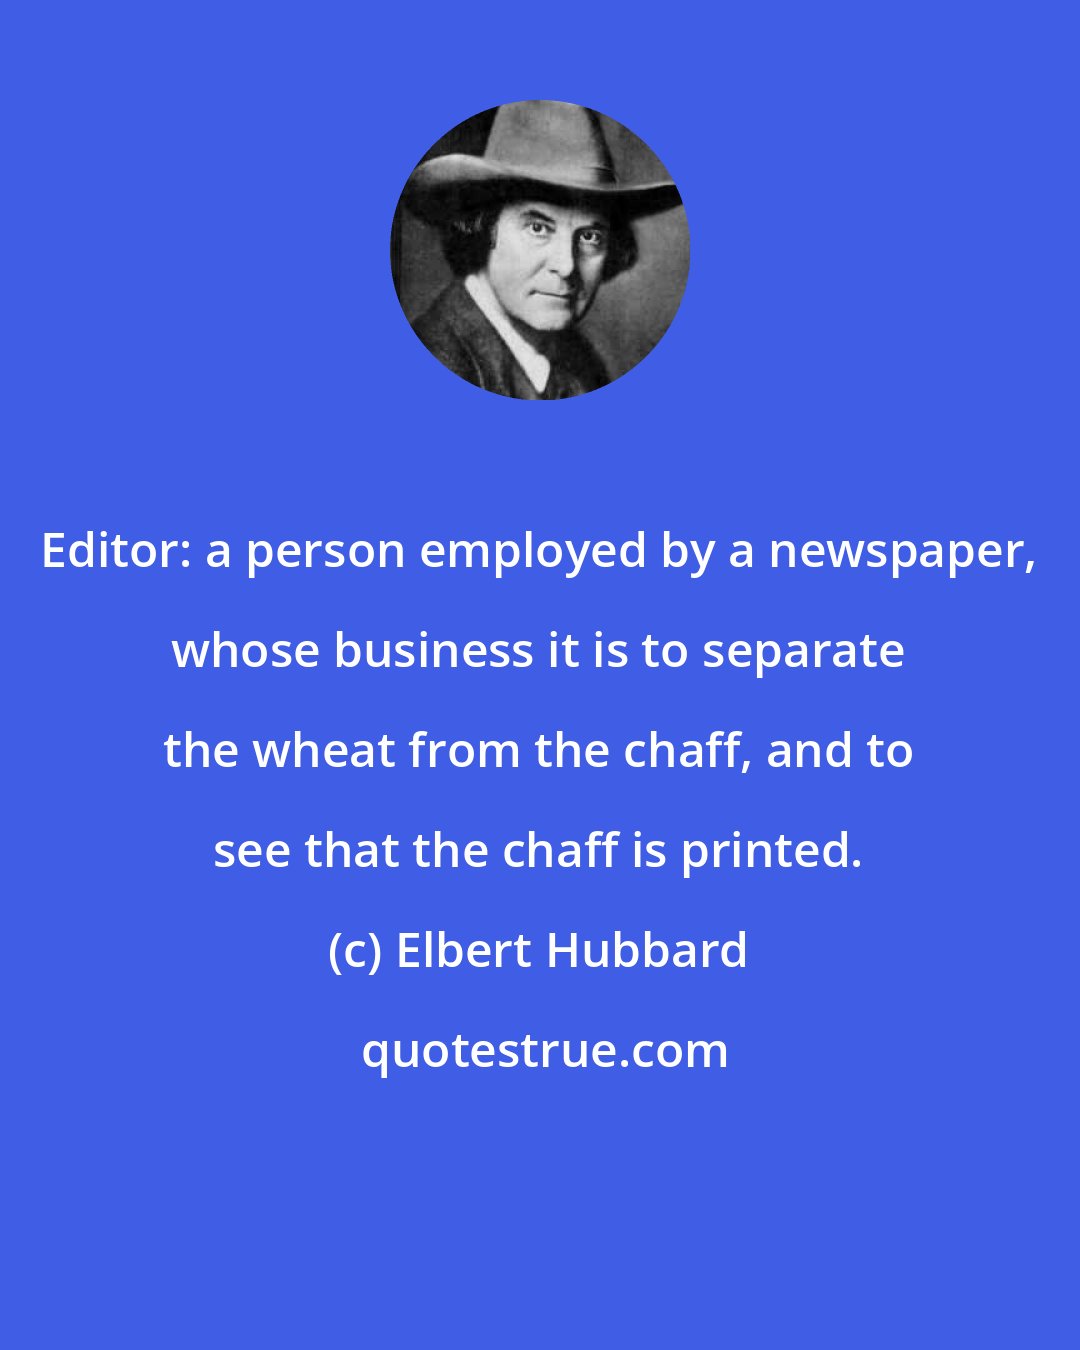 Elbert Hubbard: Editor: a person employed by a newspaper, whose business it is to separate the wheat from the chaff, and to see that the chaff is printed.